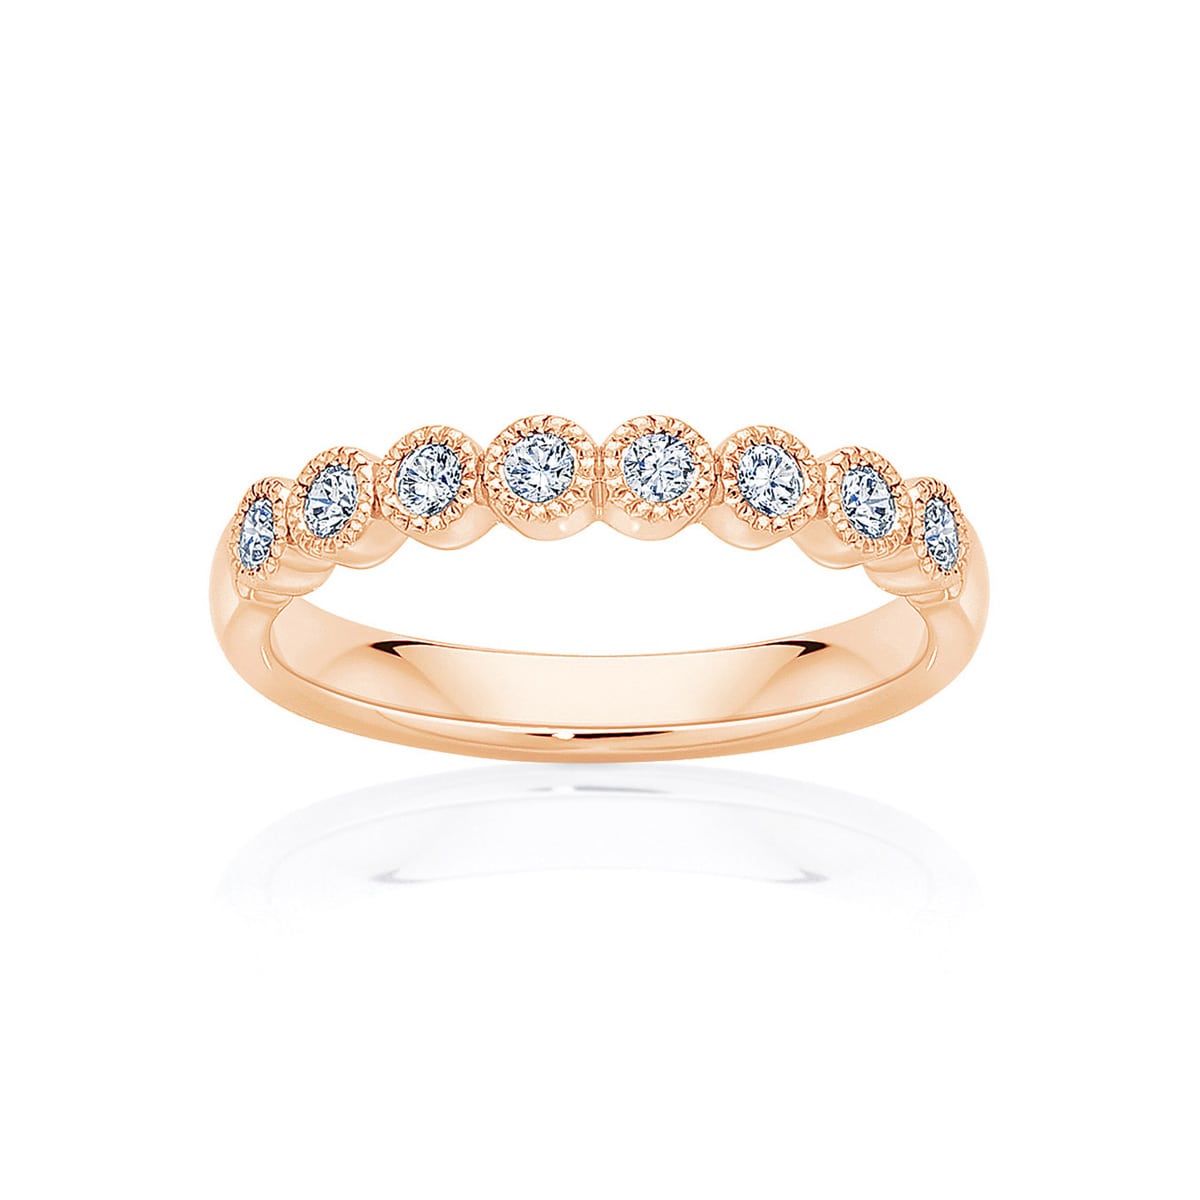 Womens Vintage Diamond Wedding Ring in Rose Gold | Array